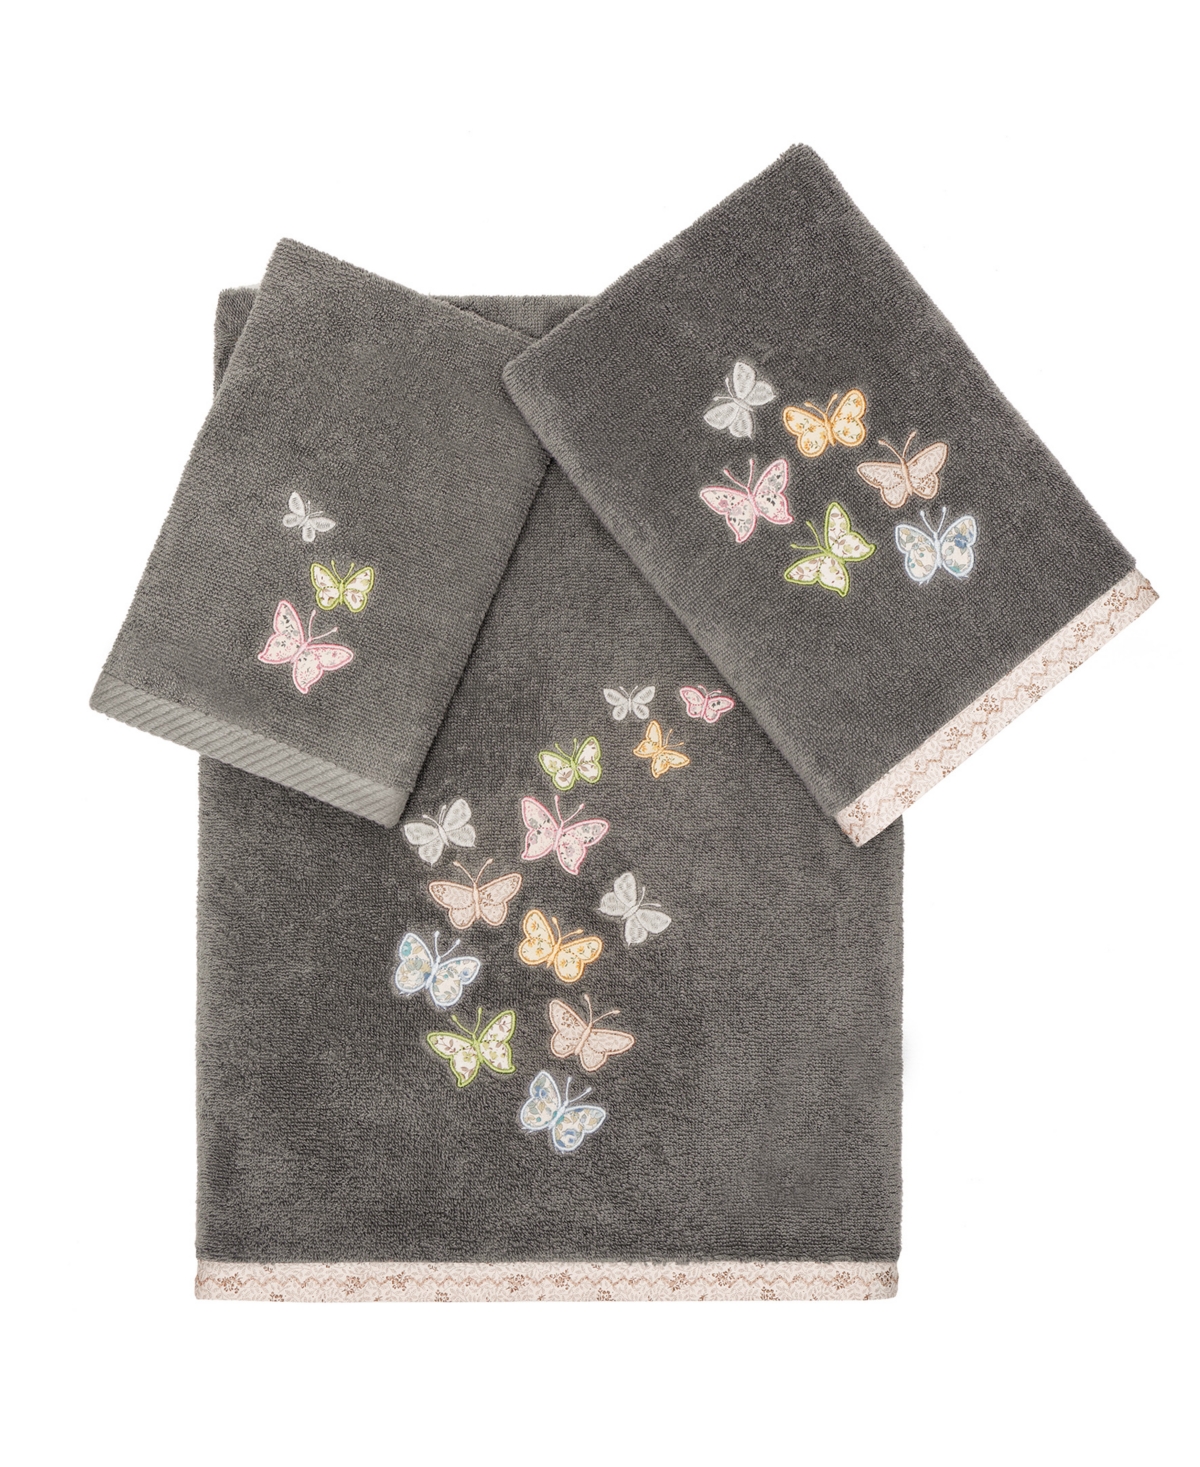 Linum Home Textiles Turkish Cotton Mariposa Embellished Towel Set, 3 Piece Bedding In Charcoal